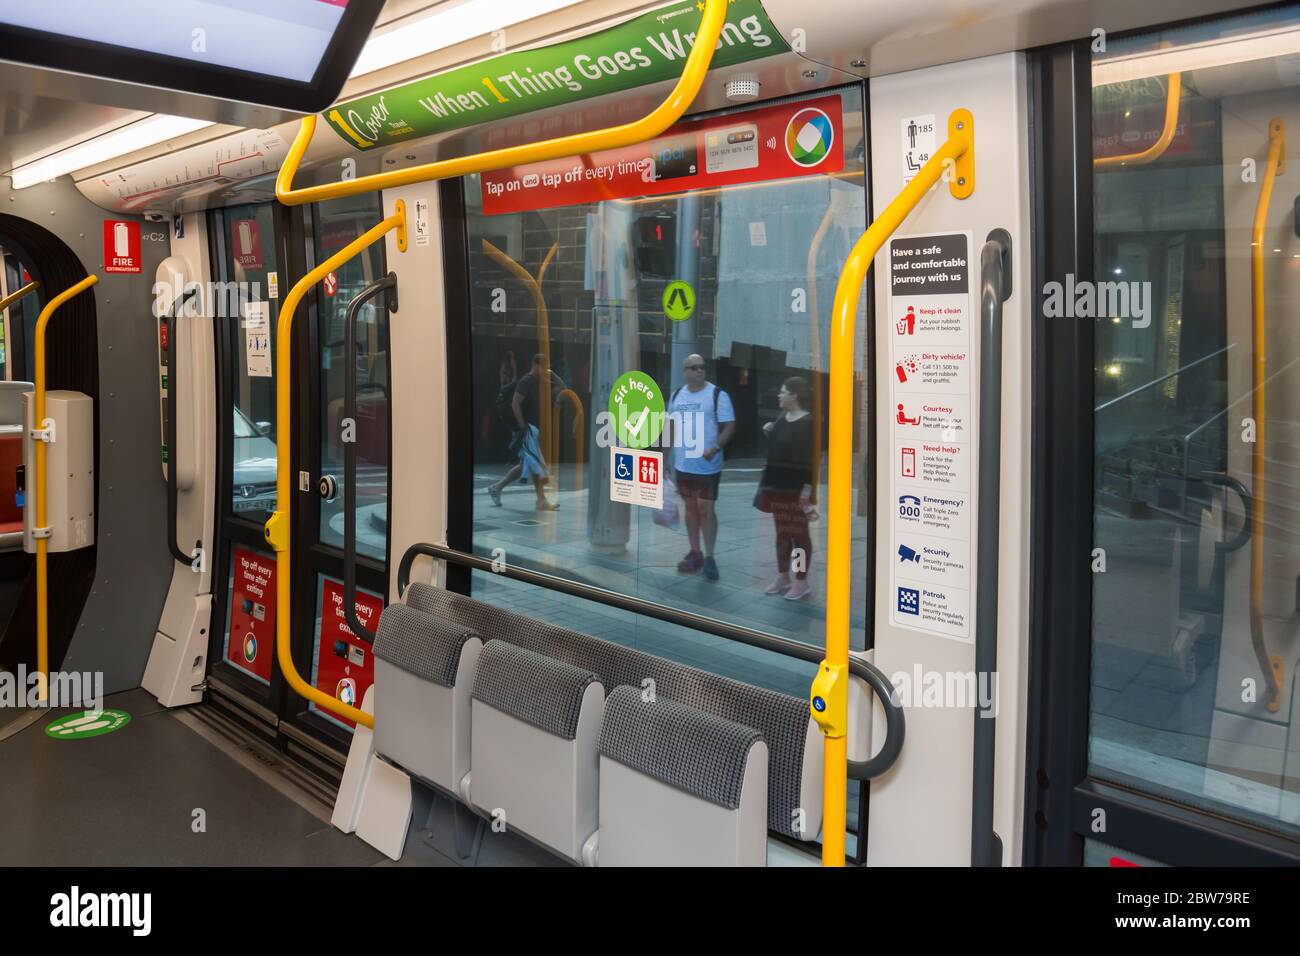 Sydney, Australia. Saturday 30th May 2020. A Sydney Tram at Circular Quay showing social distancing signage on seats and floor areas for passengers as Covid -19 resrictions ease. Credit Paul Lovelace/ Alamy Live News Stock Photo